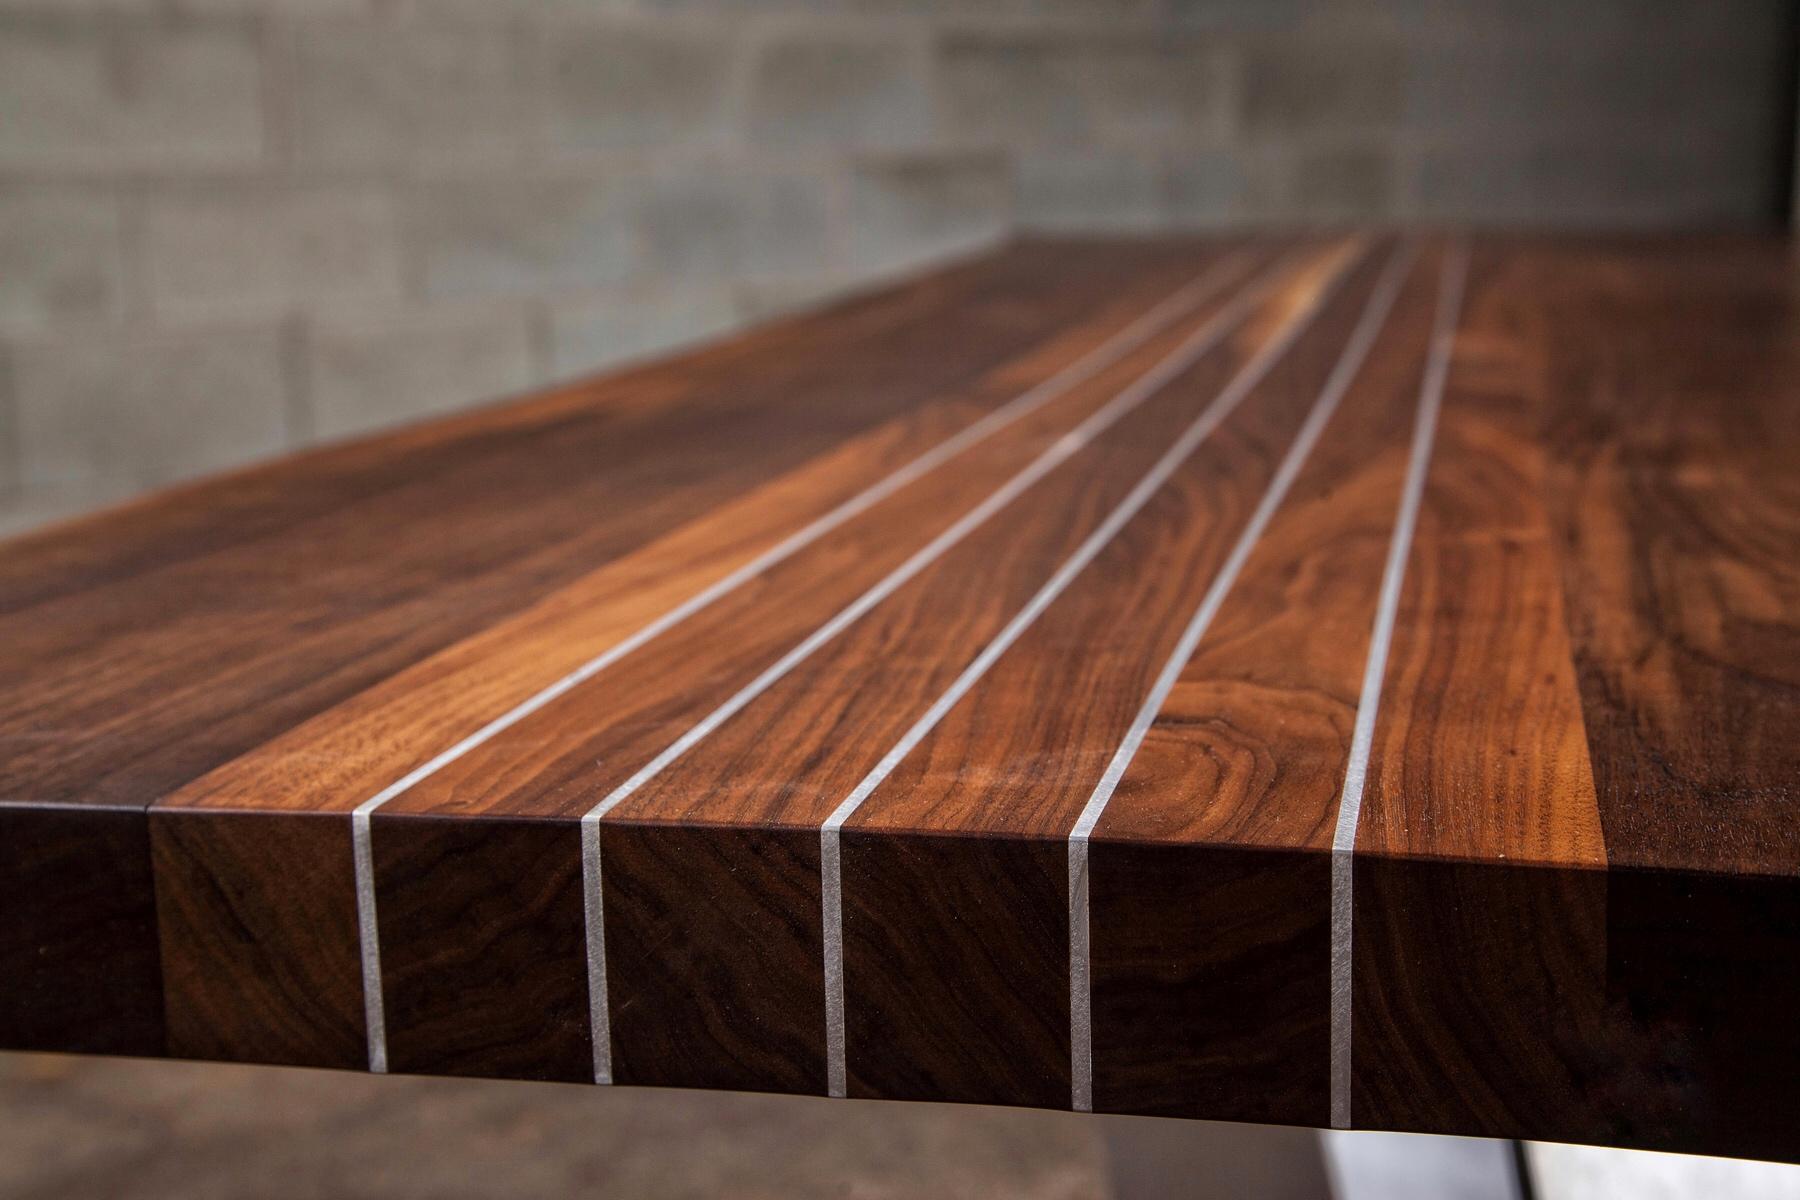 This particular black walnut dining table has aluminium flat inserted in the wood. Five strips for the dining table makes it pop. Our motto, Enhancing wood’s natural beauty has been achieved with this gorgeous live edge black walnut dining table. We